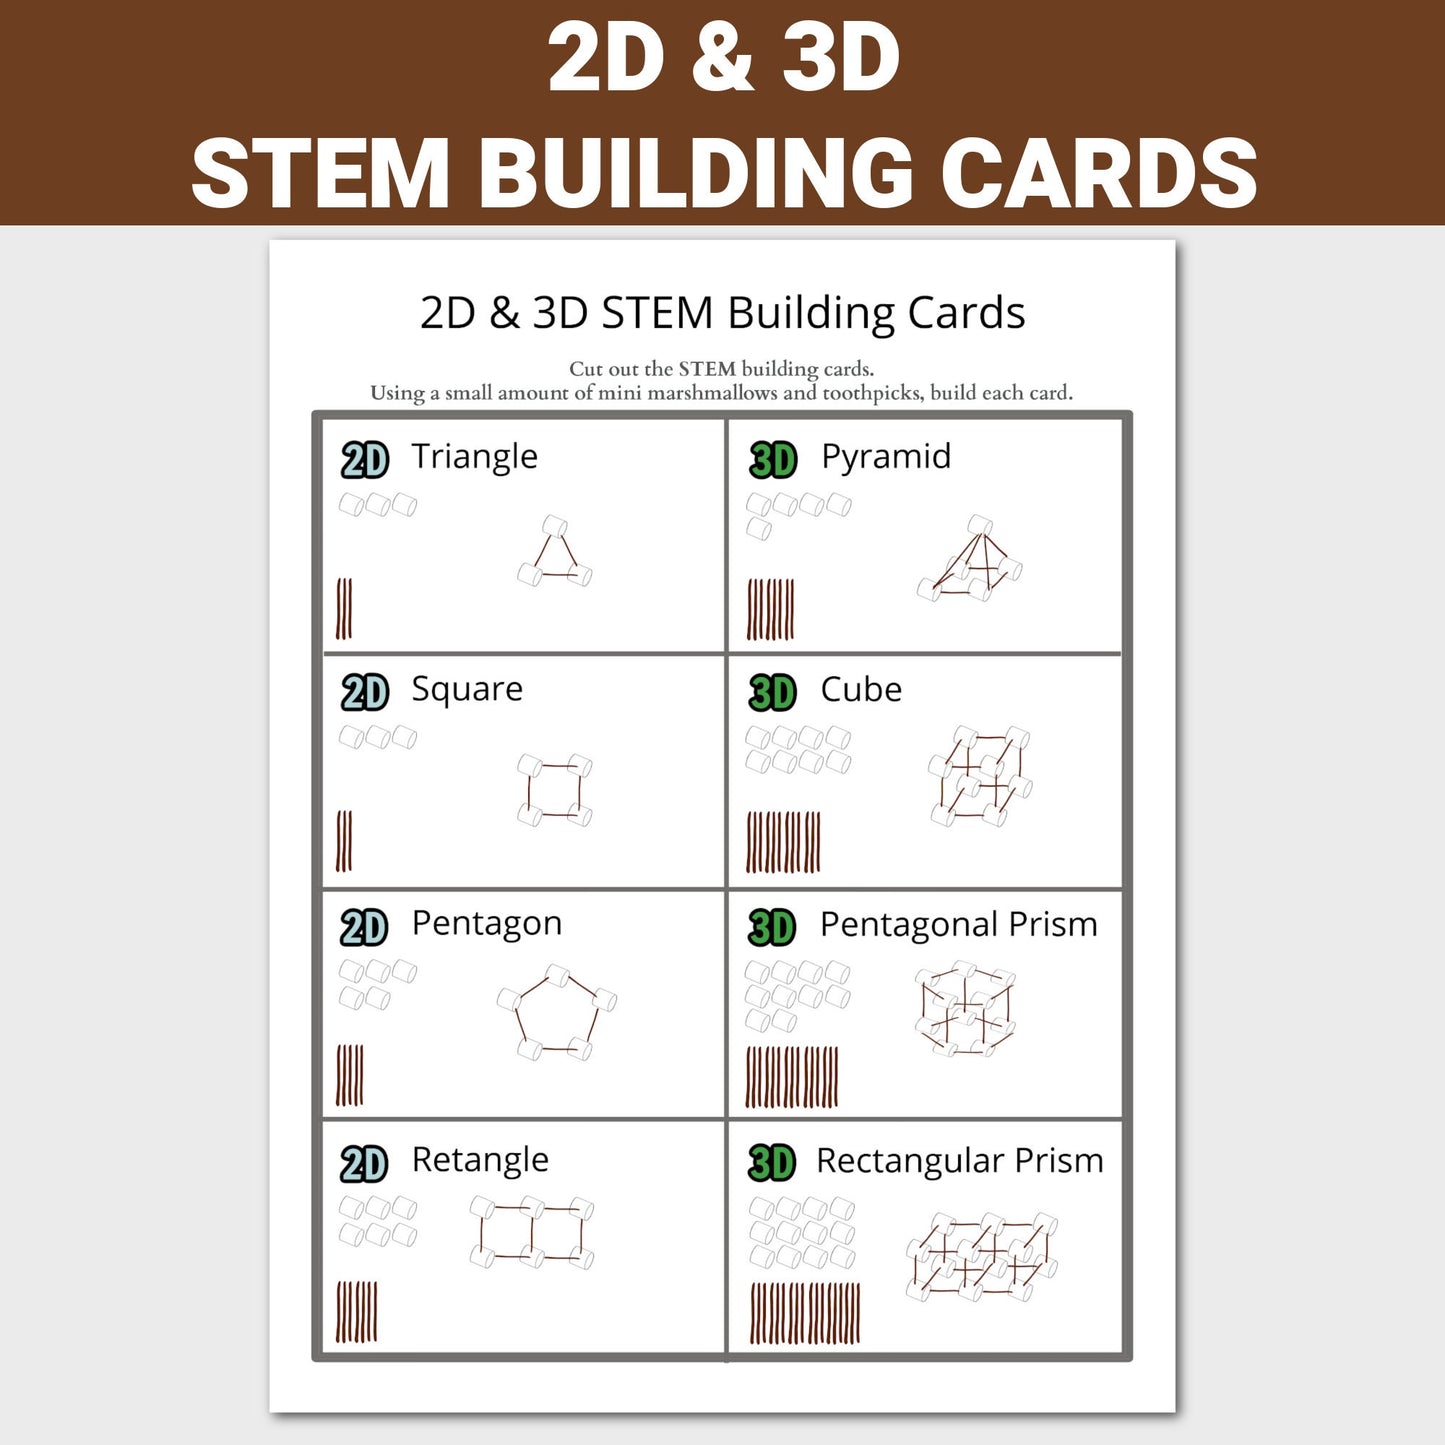 Marshmallow and Tooth Pick Stem Building Cards, STEM Activity, Printable STEM Activities, Engineering Building